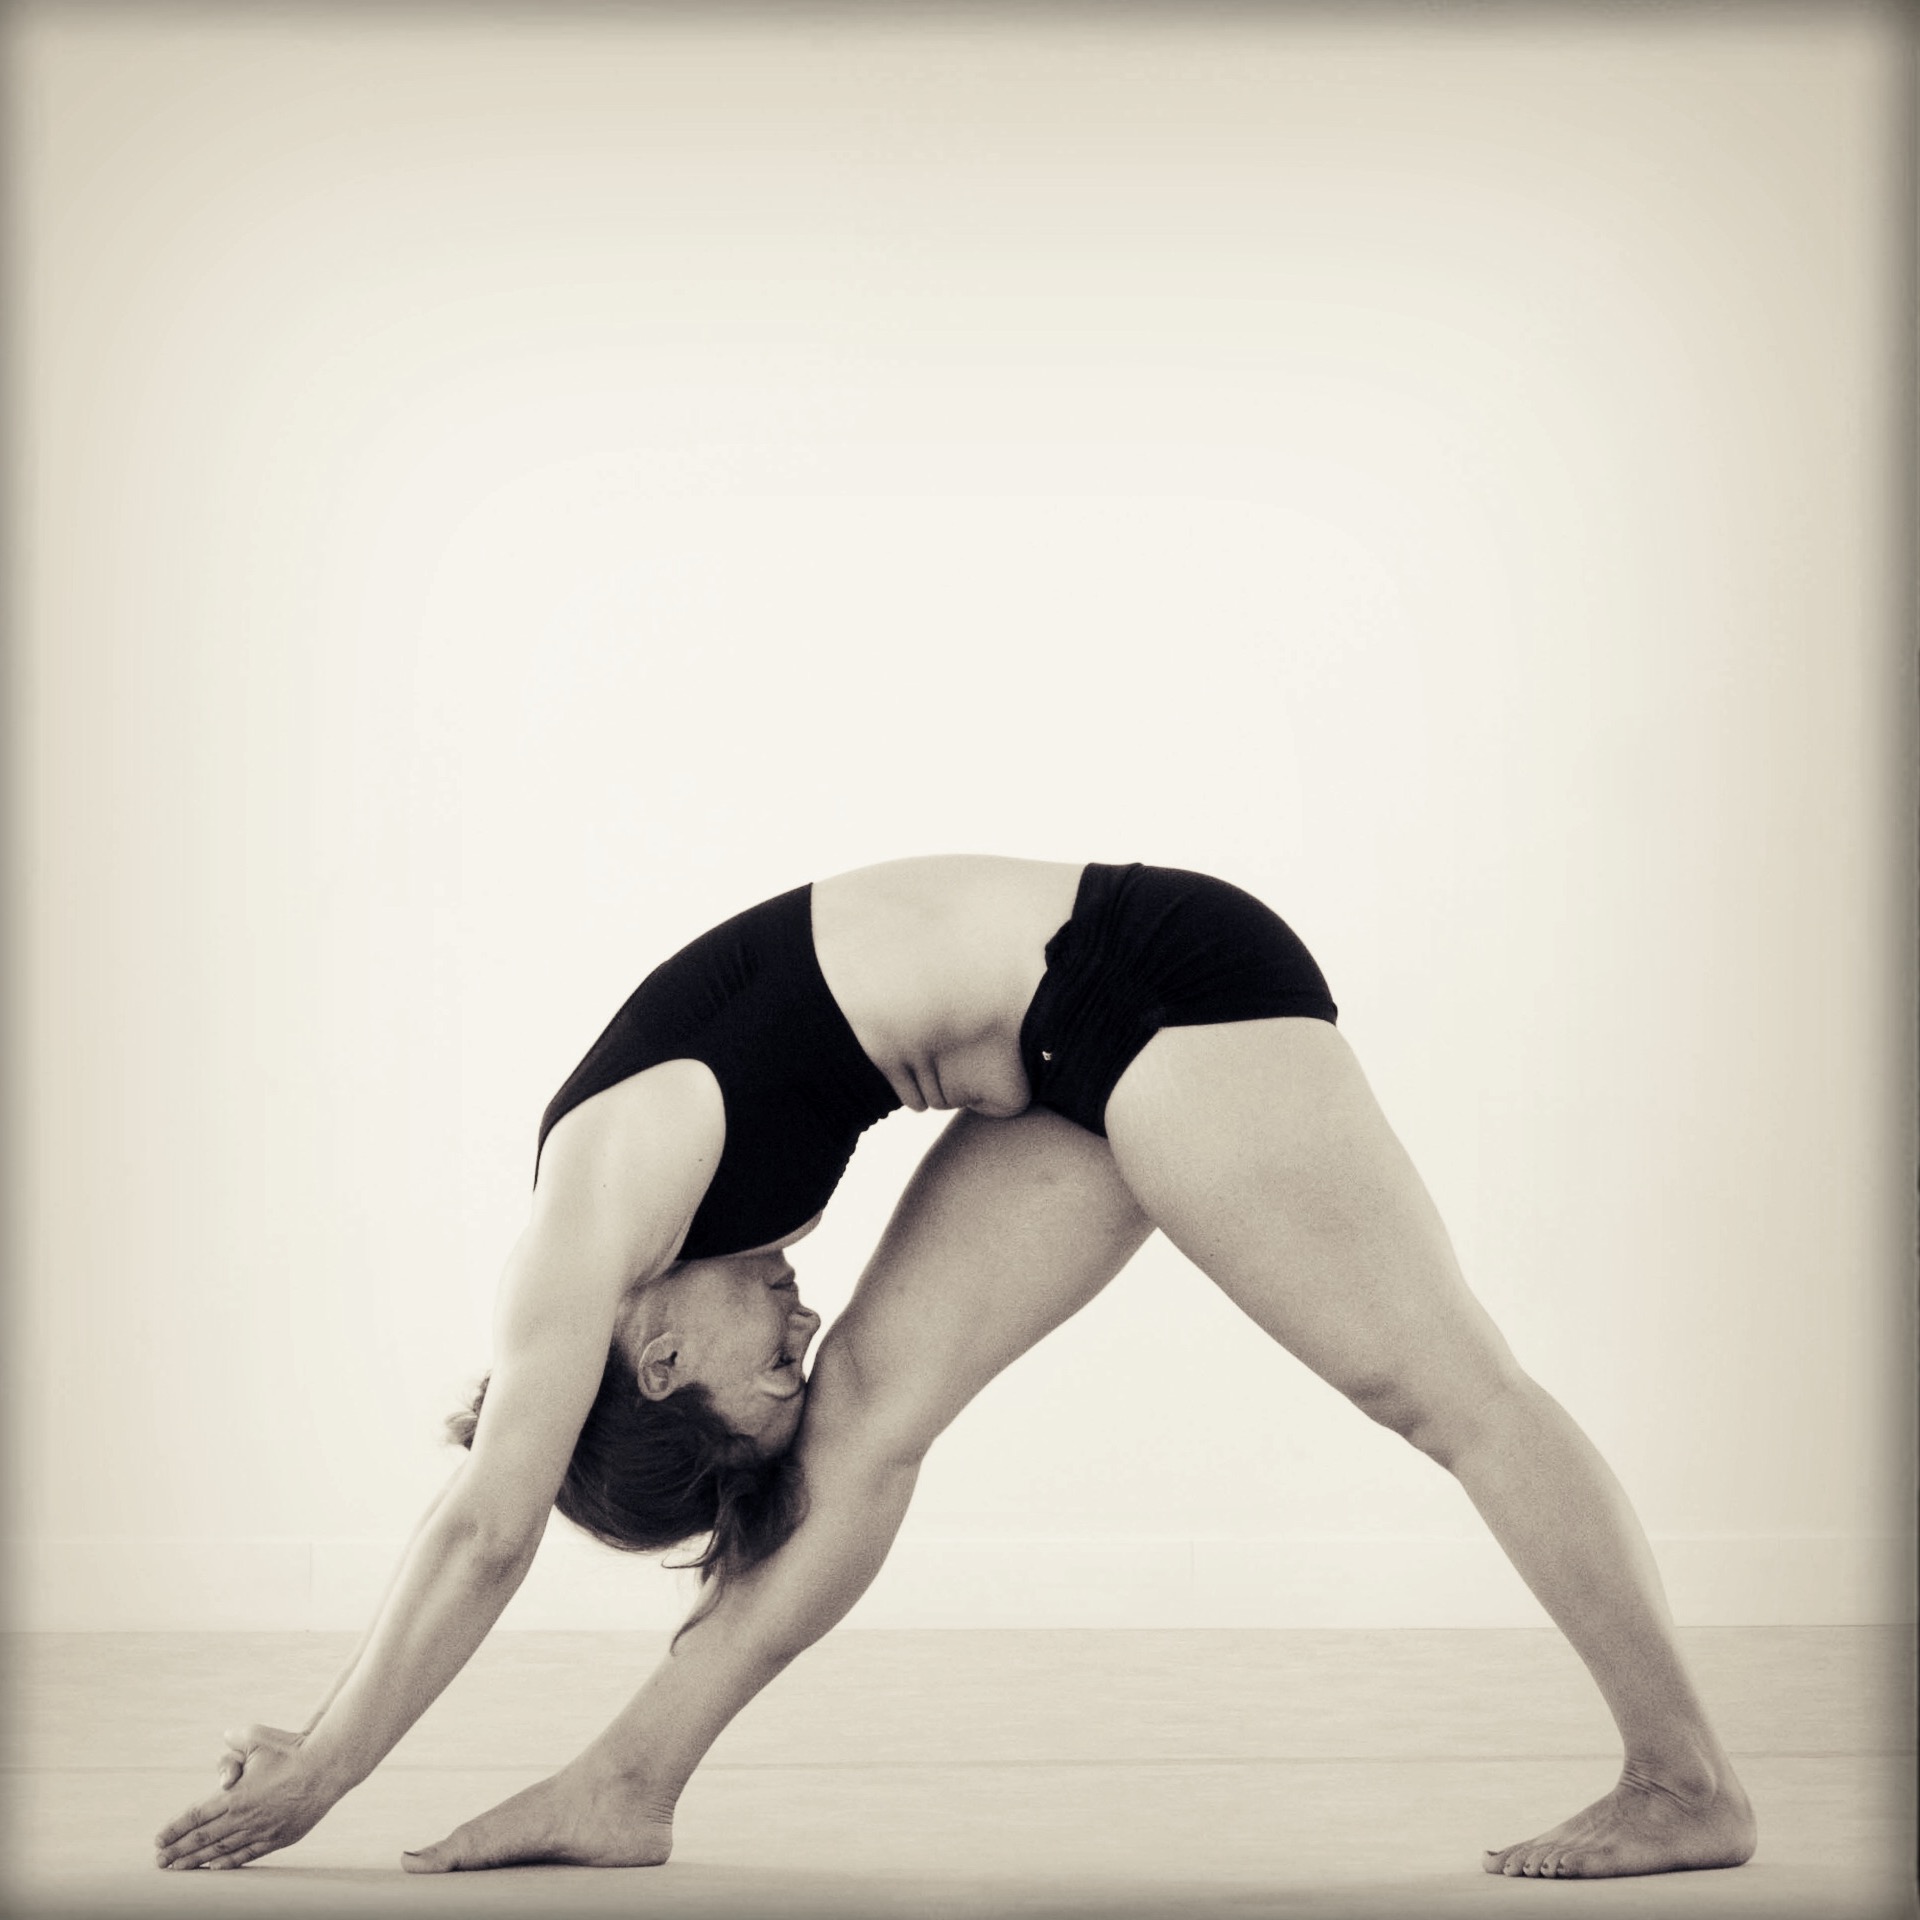 Standing Separate Leg Stretching Pose  #DandayamanaBibhaktapadaPaschimottanasana | Standing Separate Leg  Stretching Pose: Dandayamana Bibhaktapada Paschimottanasana Great posture  for thighs hips and lower back, but it also gives so... | By PURE Yoga